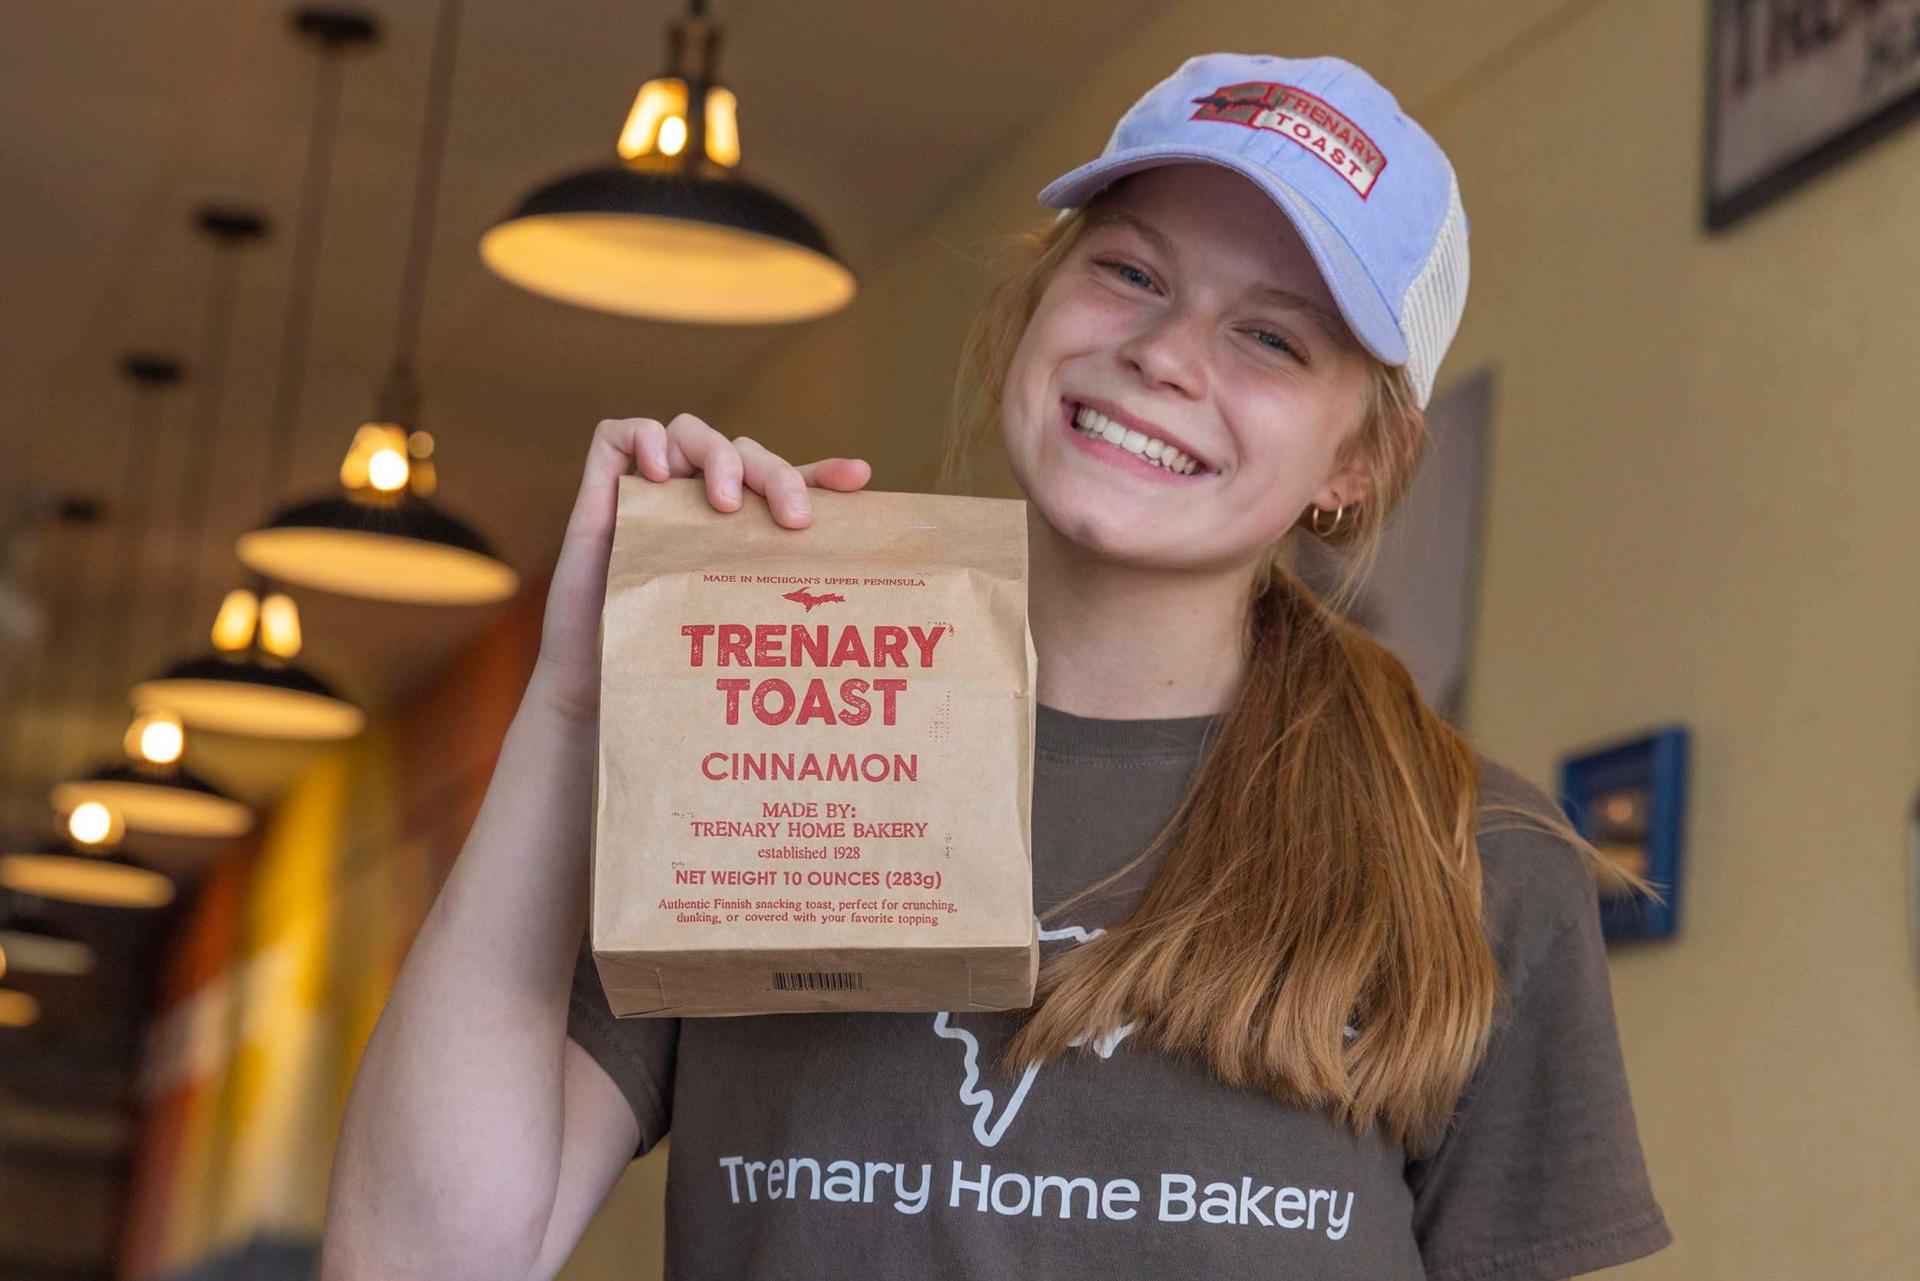 A Trenary Home Bakery worker holding up a bag of Trenary Toast.